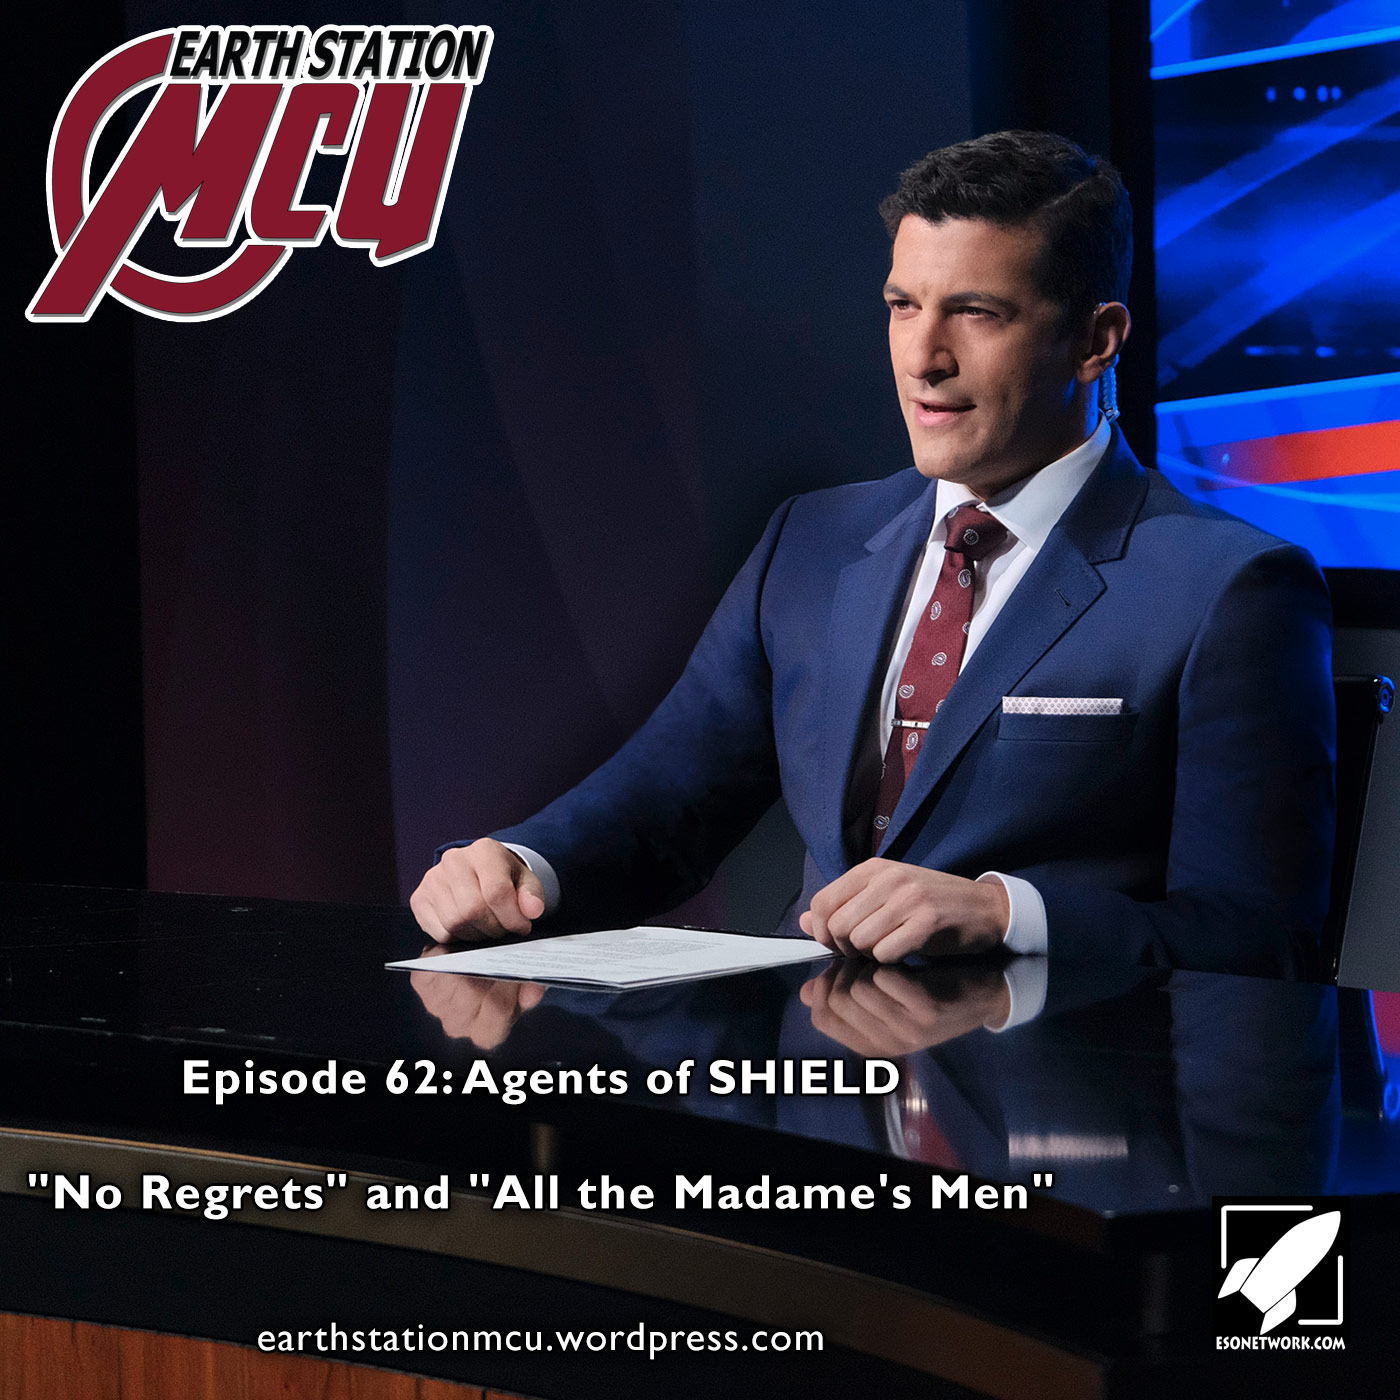 Earth Station MCU Episode 62: Agents of SHIELD ”No Regrets” and ”All the Madam’s Men”